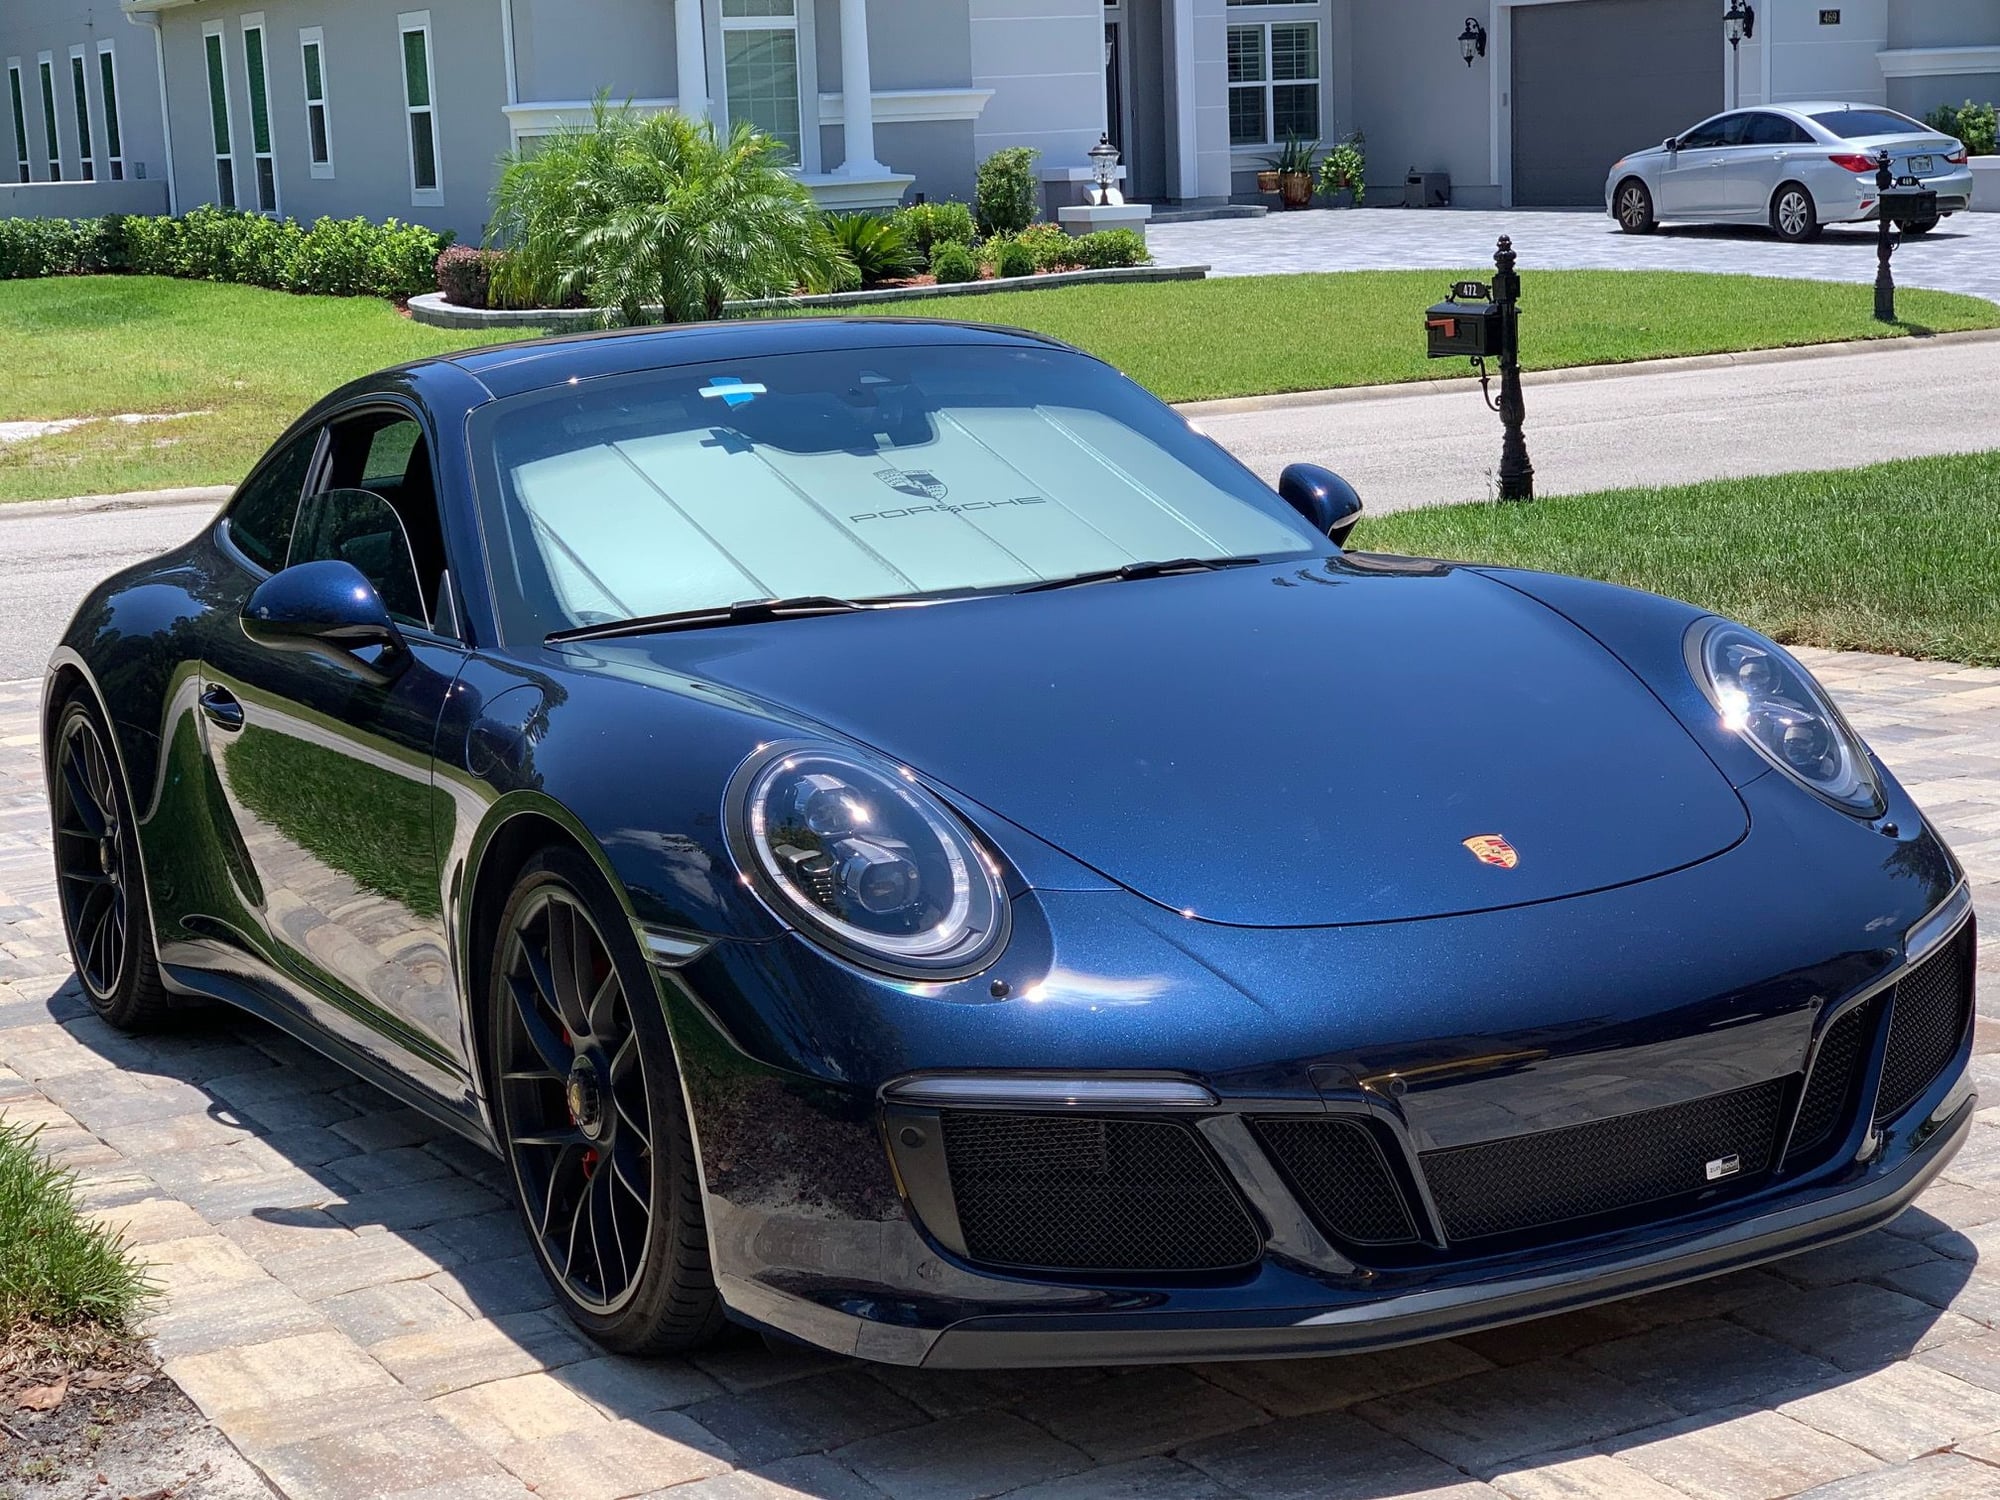 2017 Porsche 911 - 2017 Porsche Carrera 911 GTS - Used - VIN WP0AB2A9XHS124686 - 7,700 Miles - 6 cyl - 2WD - Automatic - Coupe - Blue - St Johns, FL 32259, United States